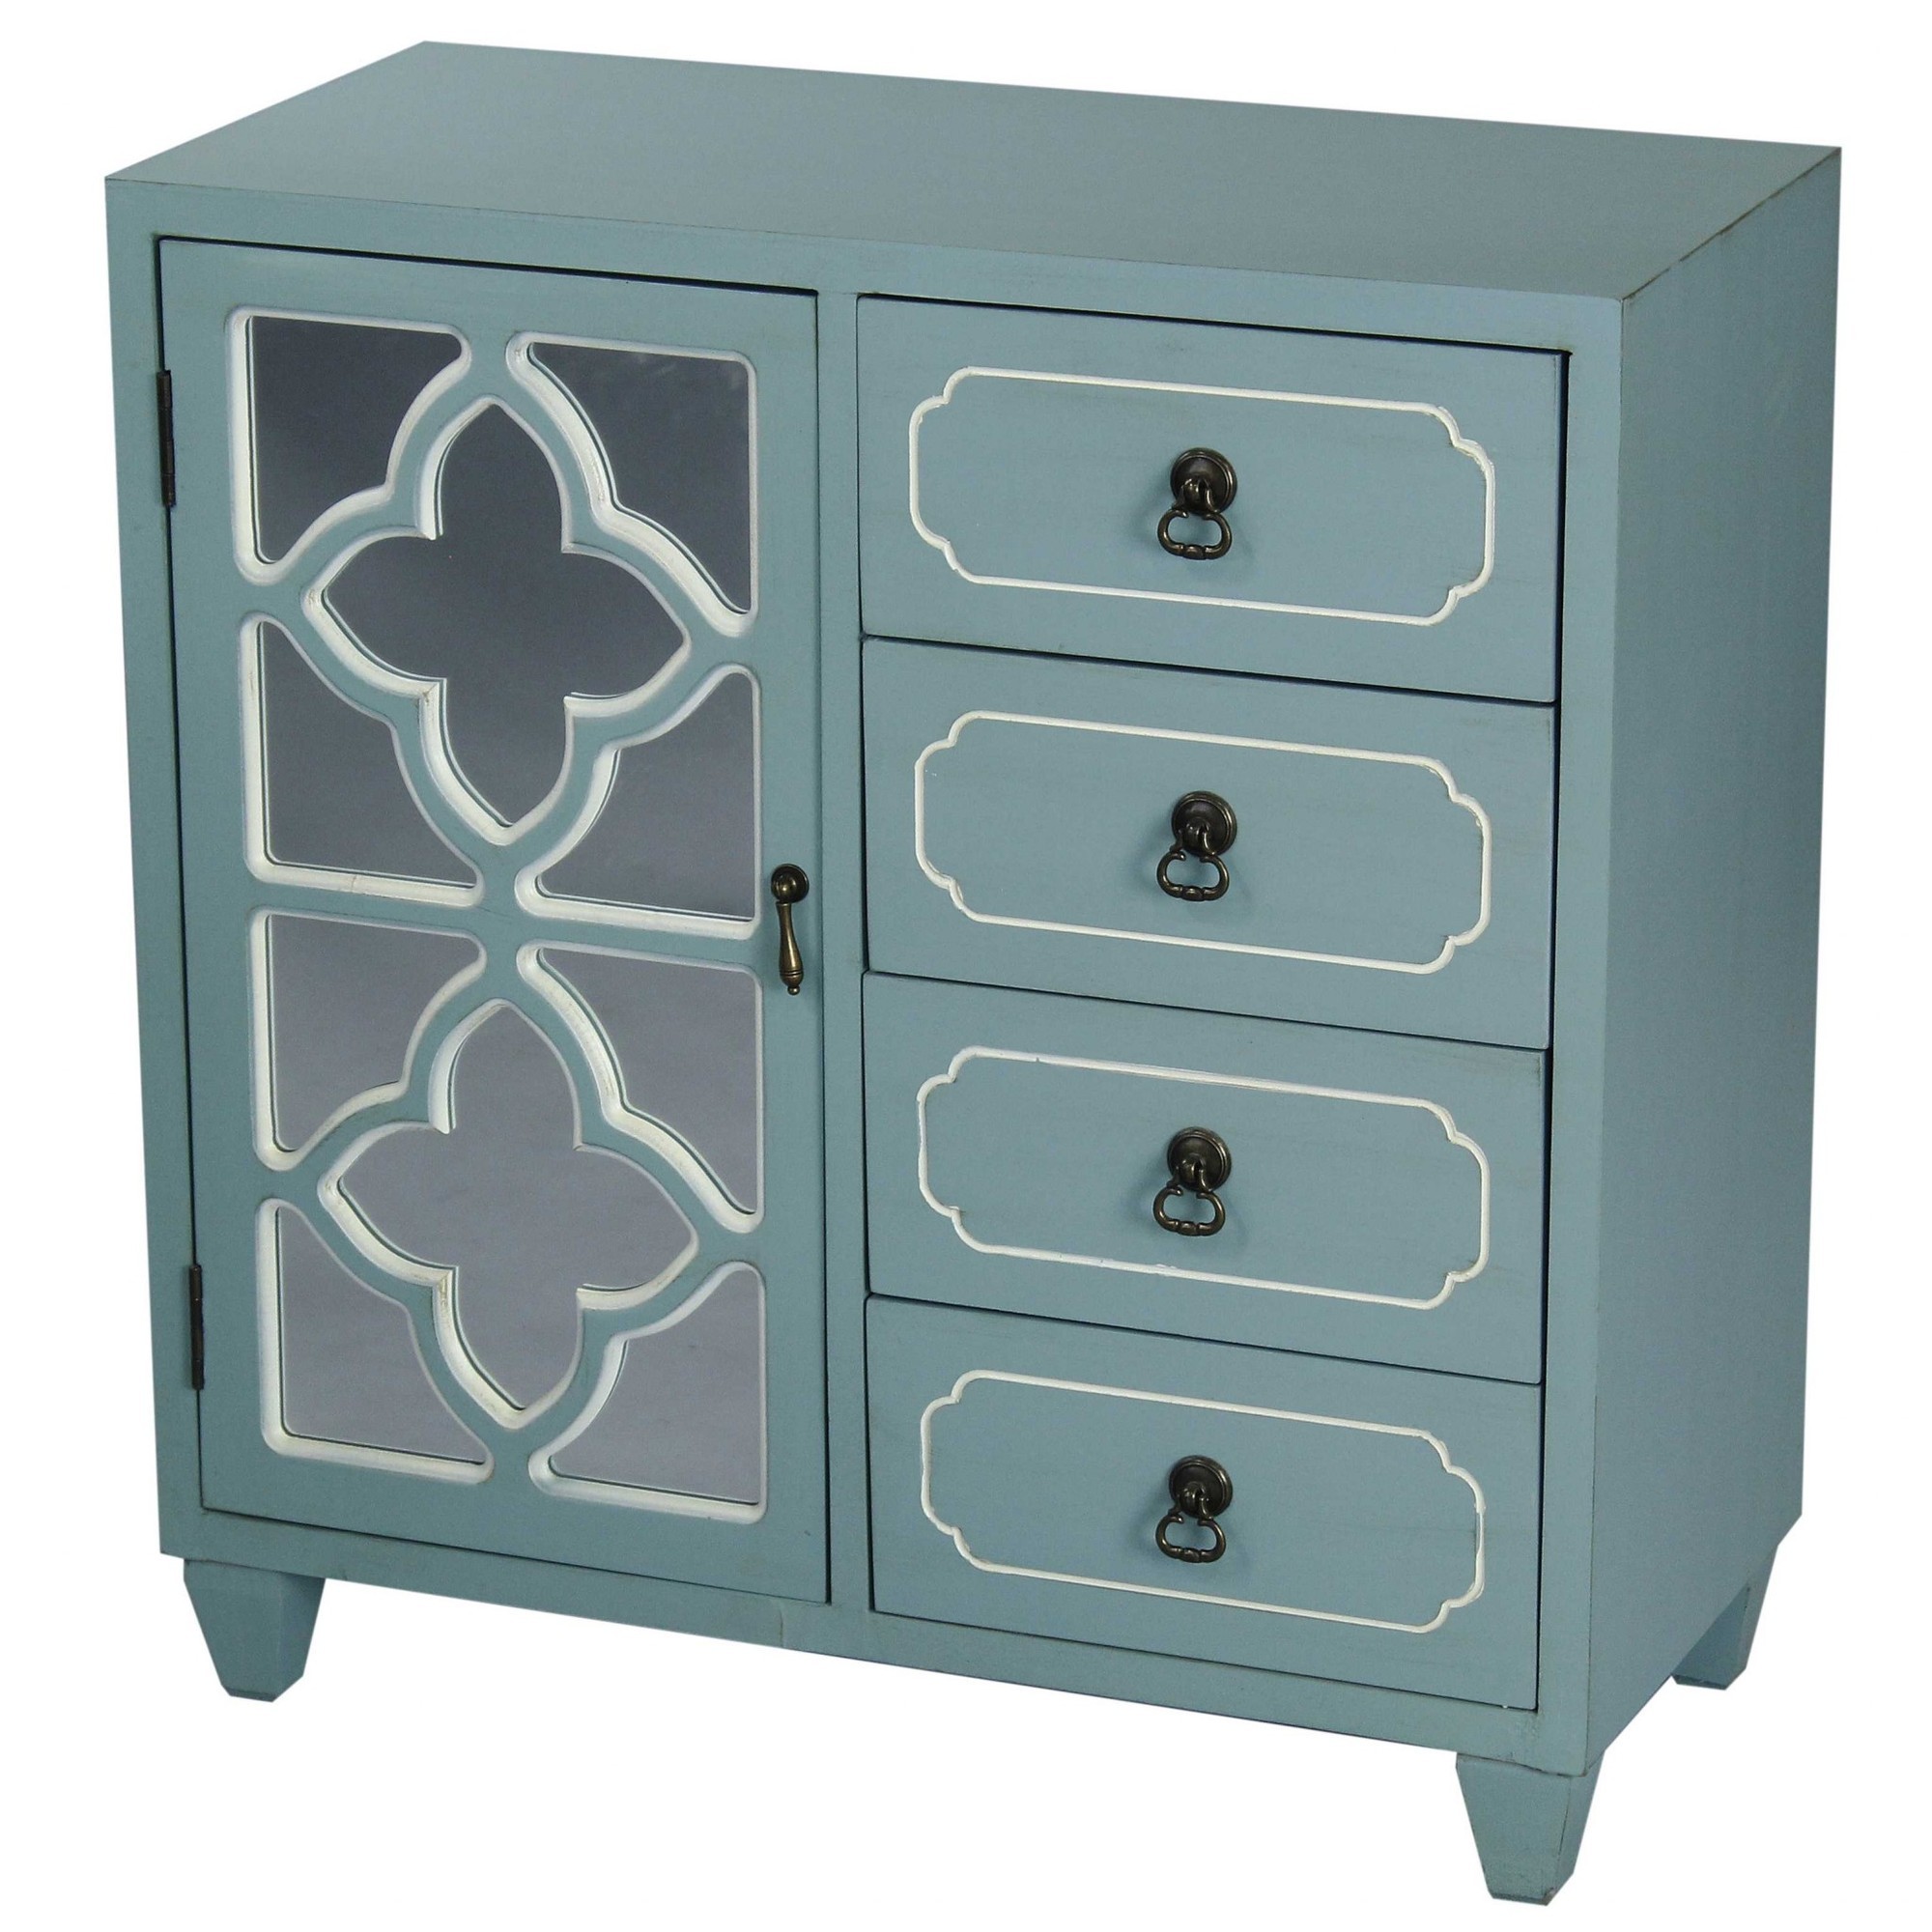 29.5" X 14" X 30.75" Light Blue MDF Wood Mirrored Glass Sideboard with a Door and Drawers